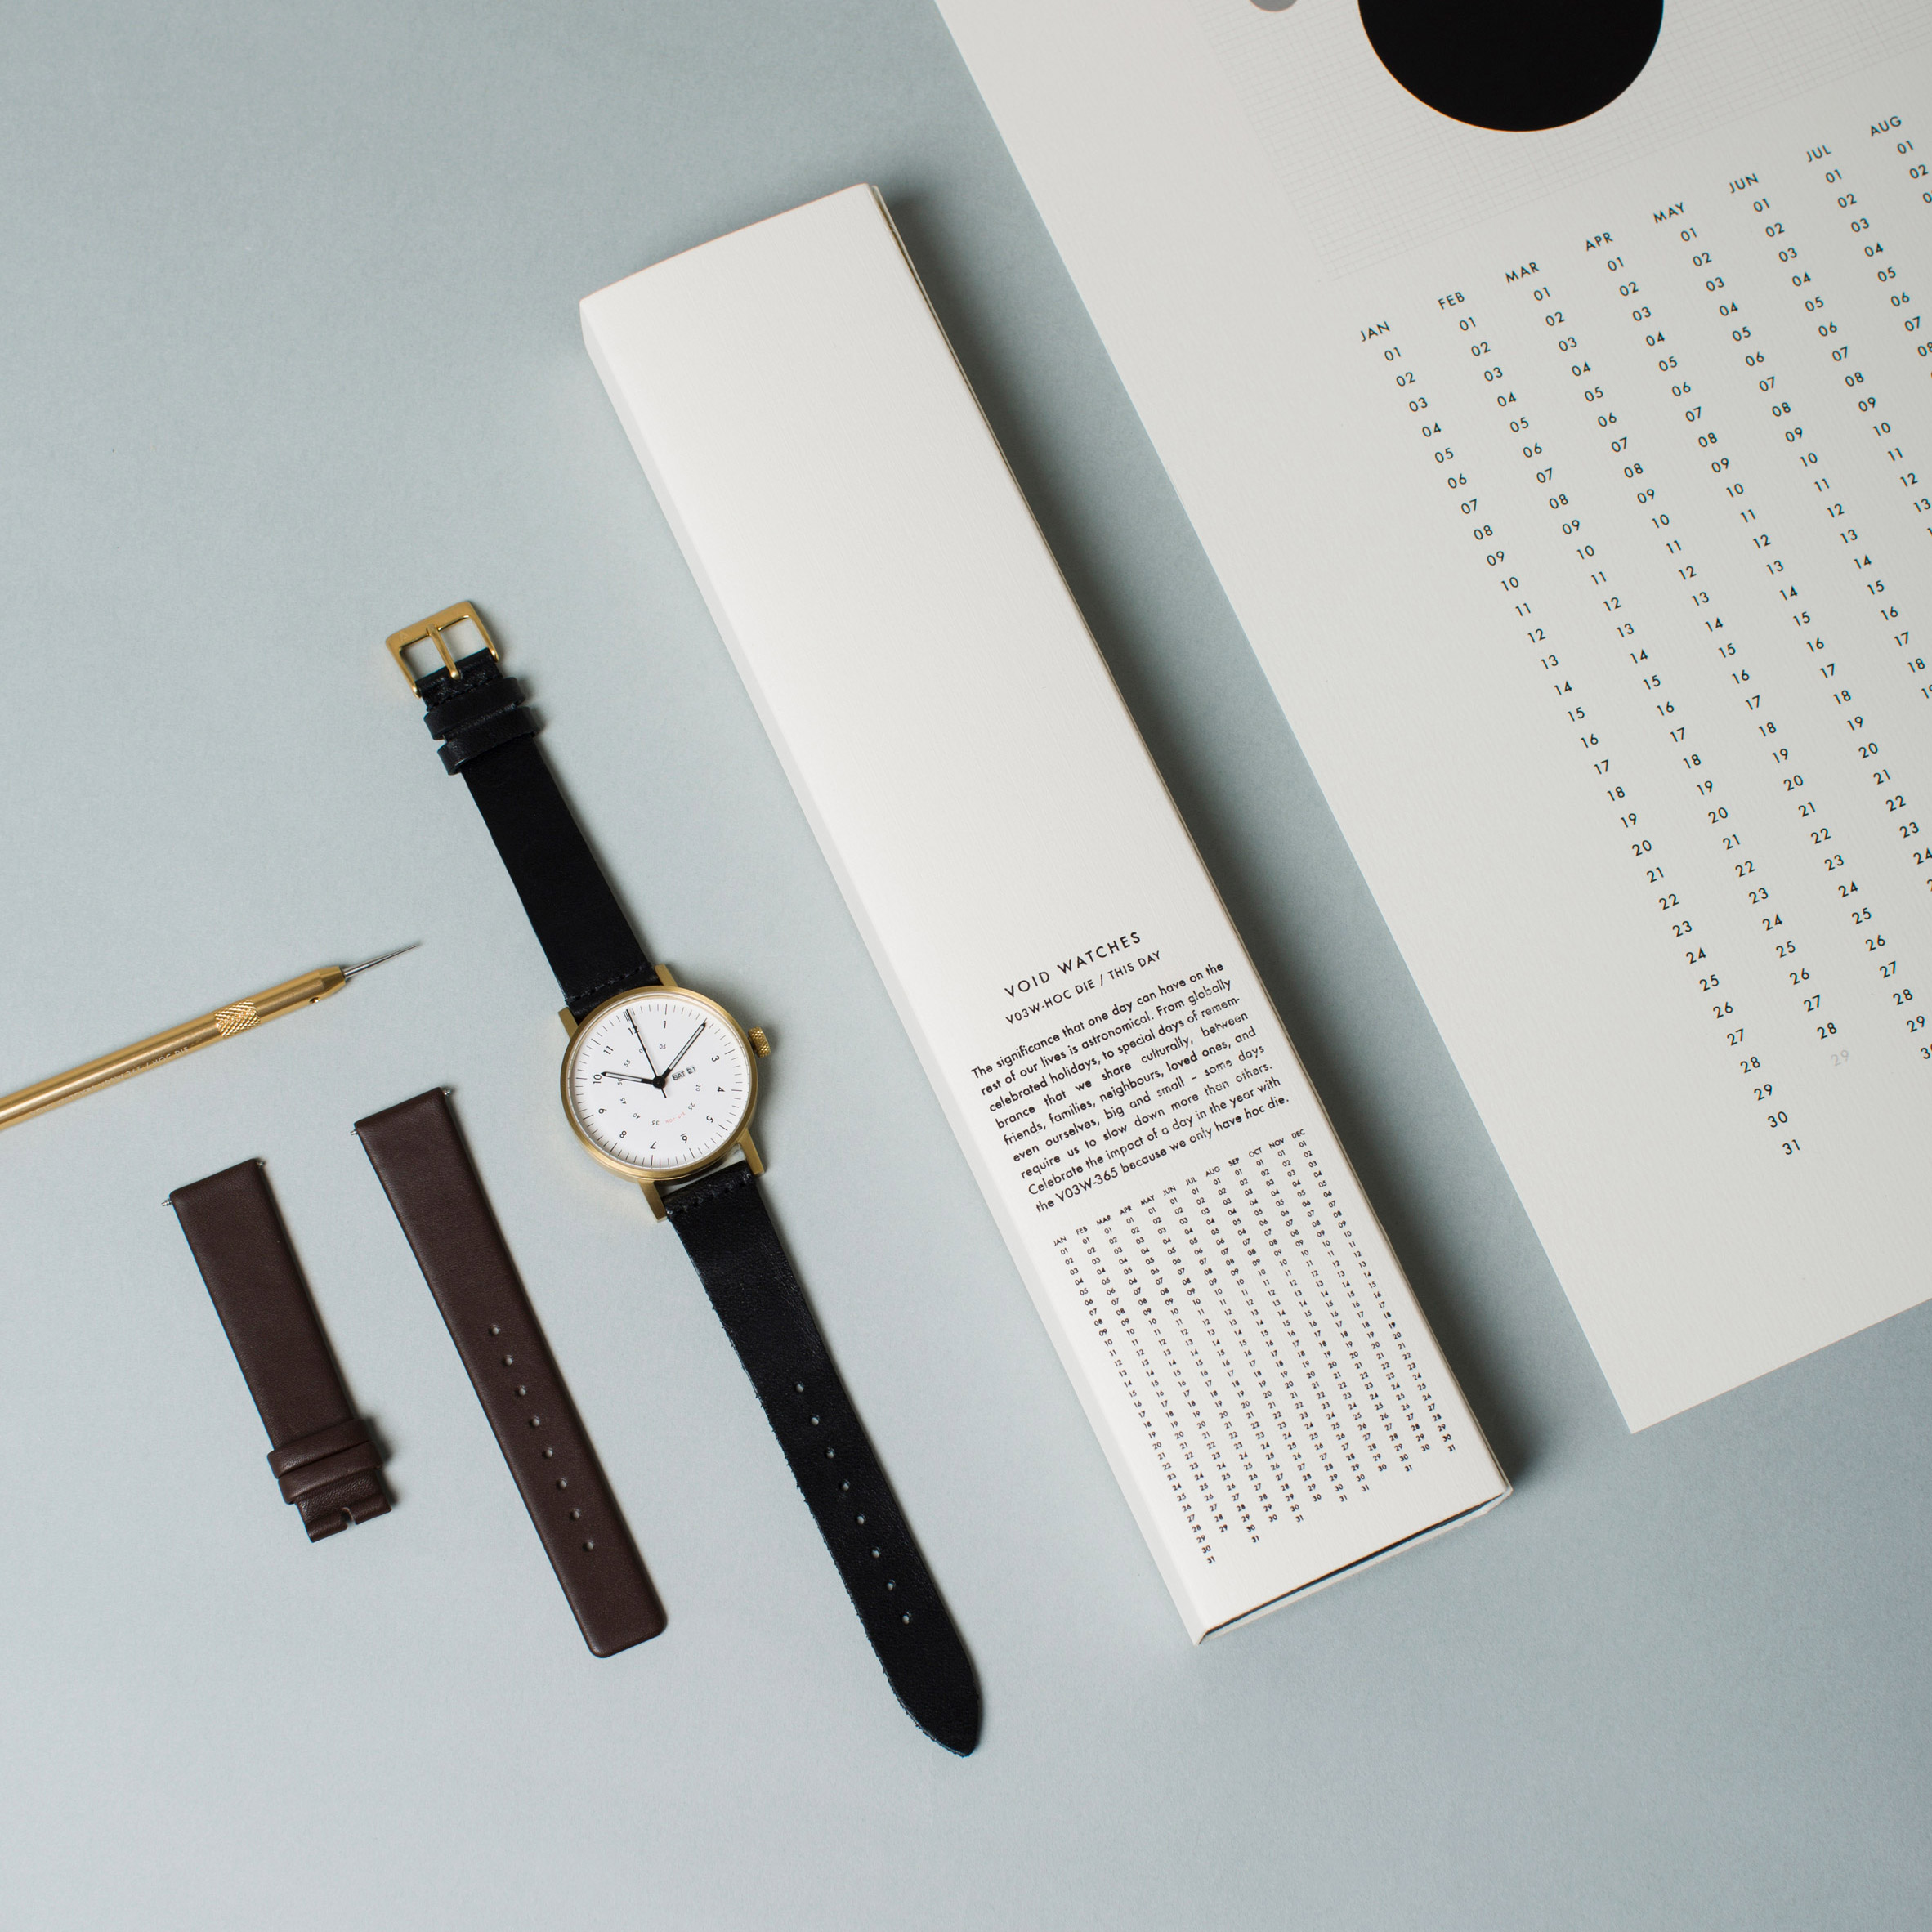 Dezeen has teamed up with Swedish brand Void Watches to give readers the chance to win one of five limited-edition V03W-365 timepieces.